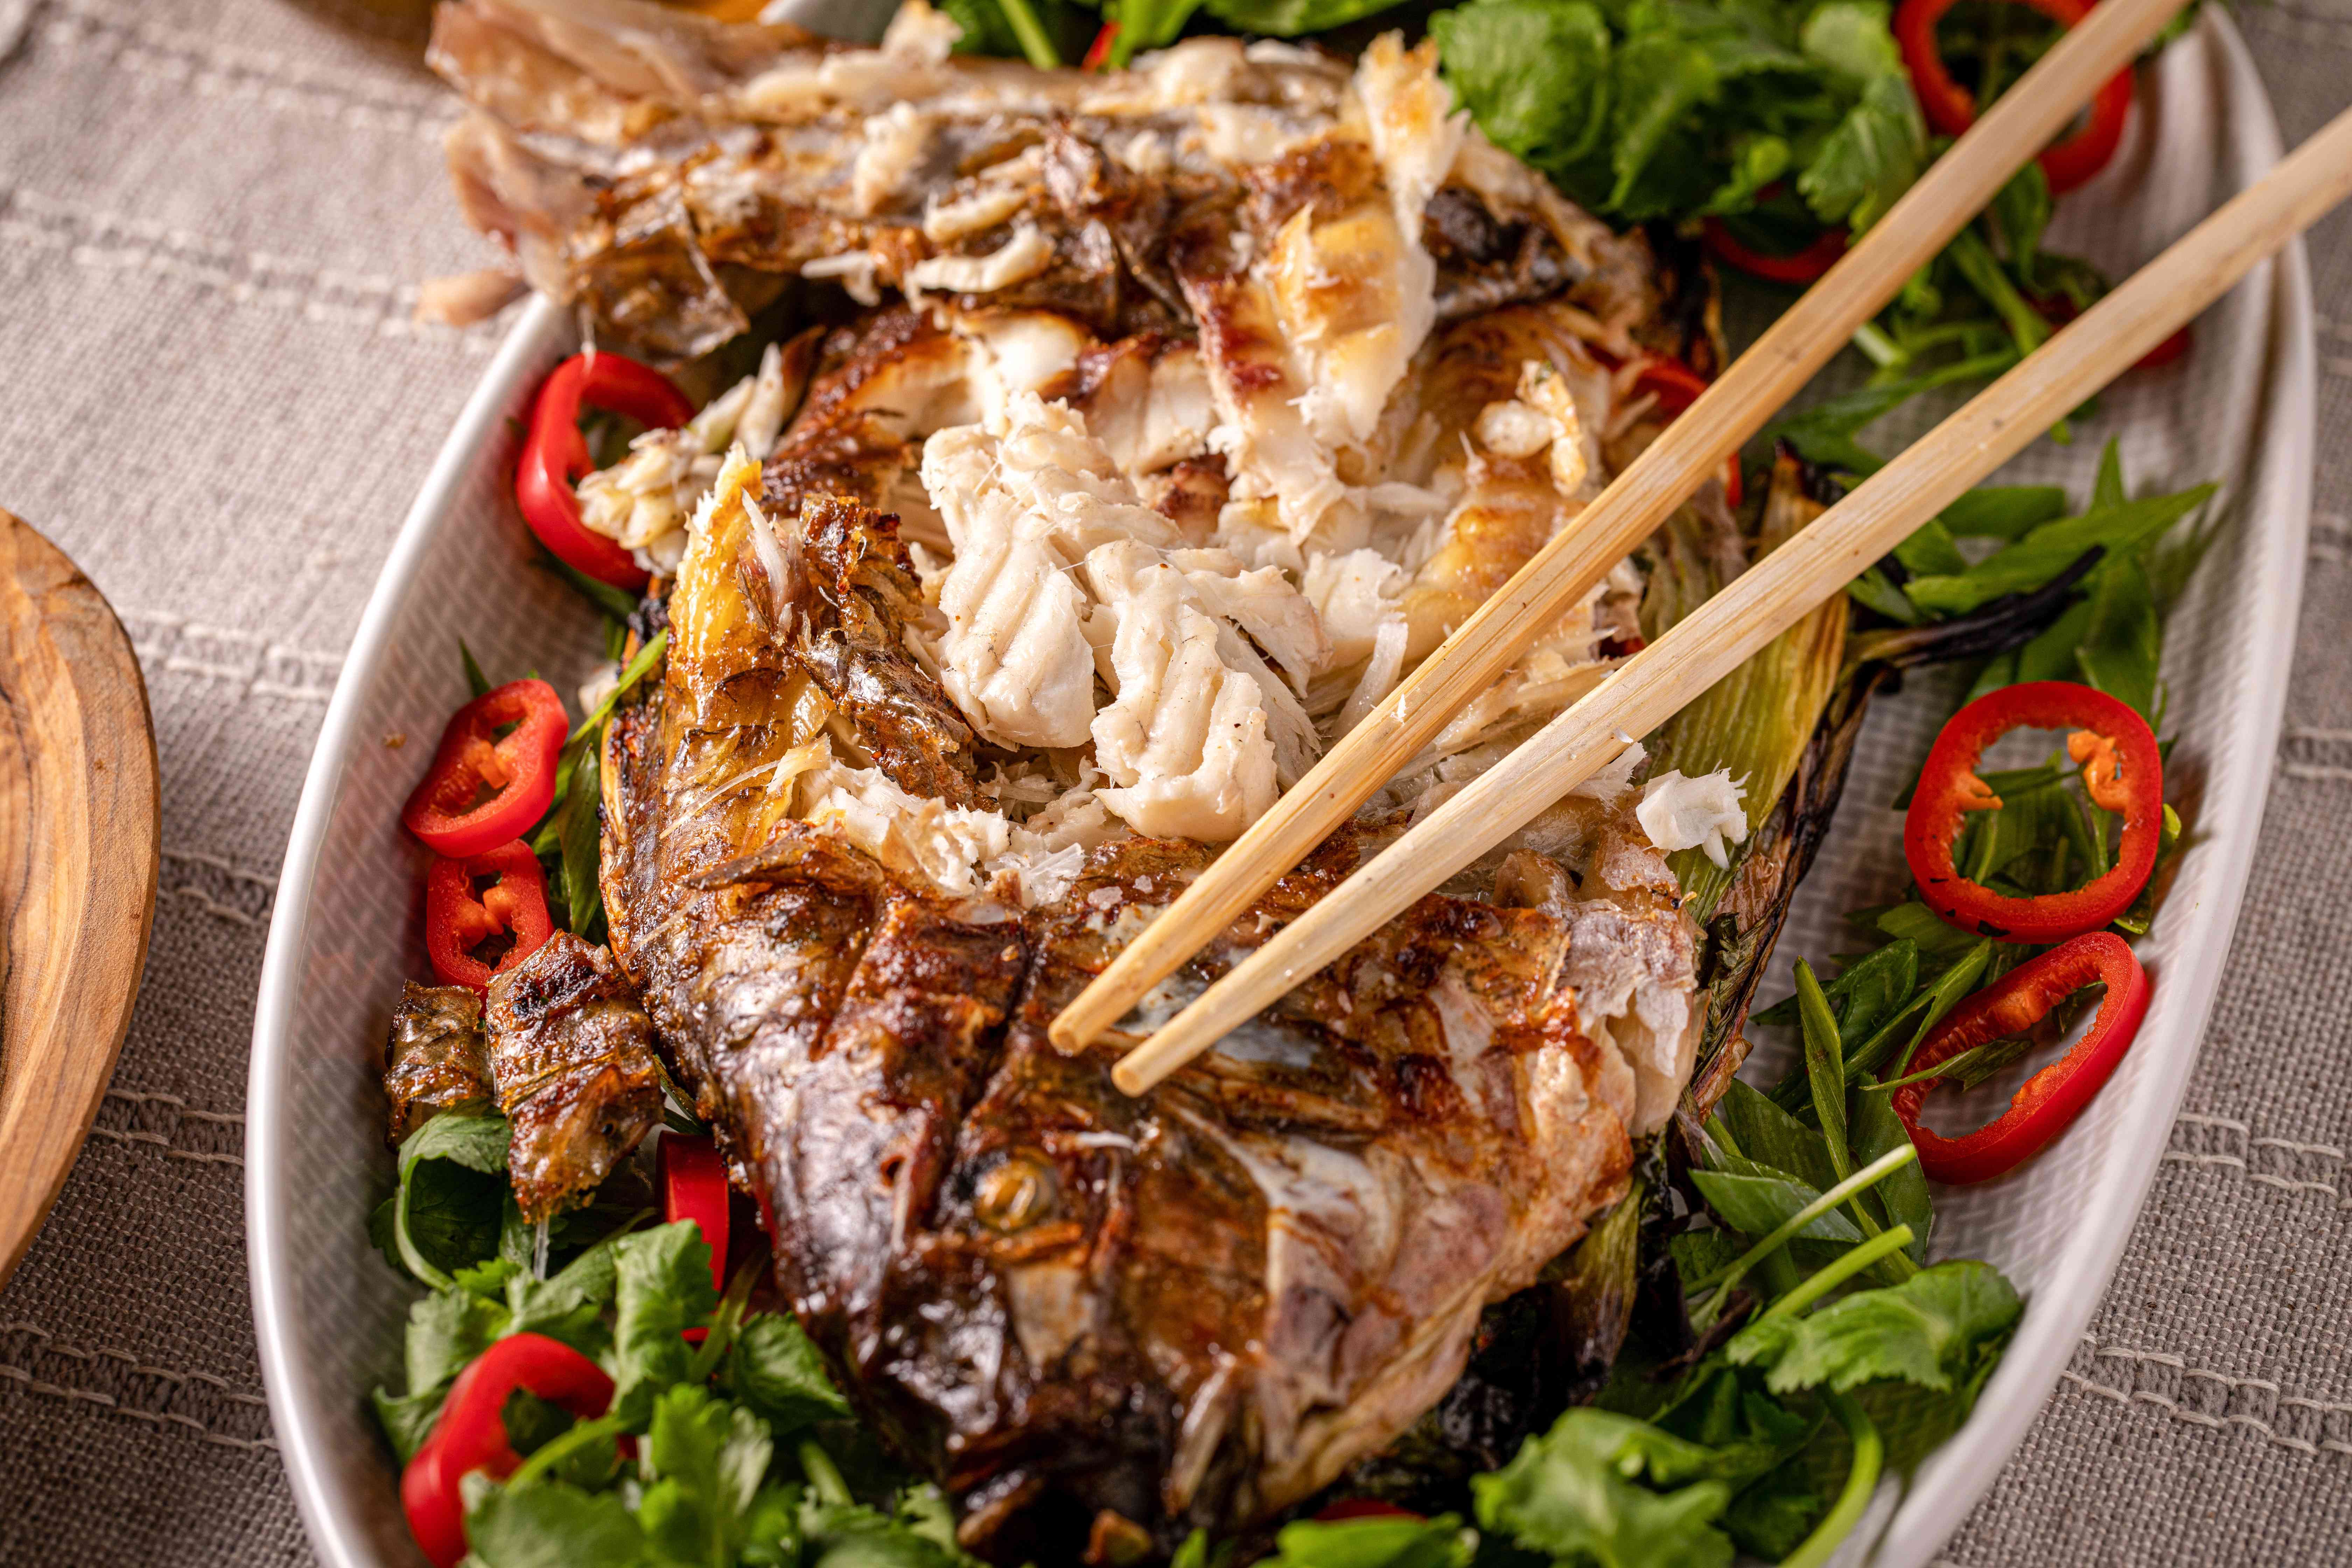 Wooden skewers flaking grilled whole fish stuffed with herbs and chilies